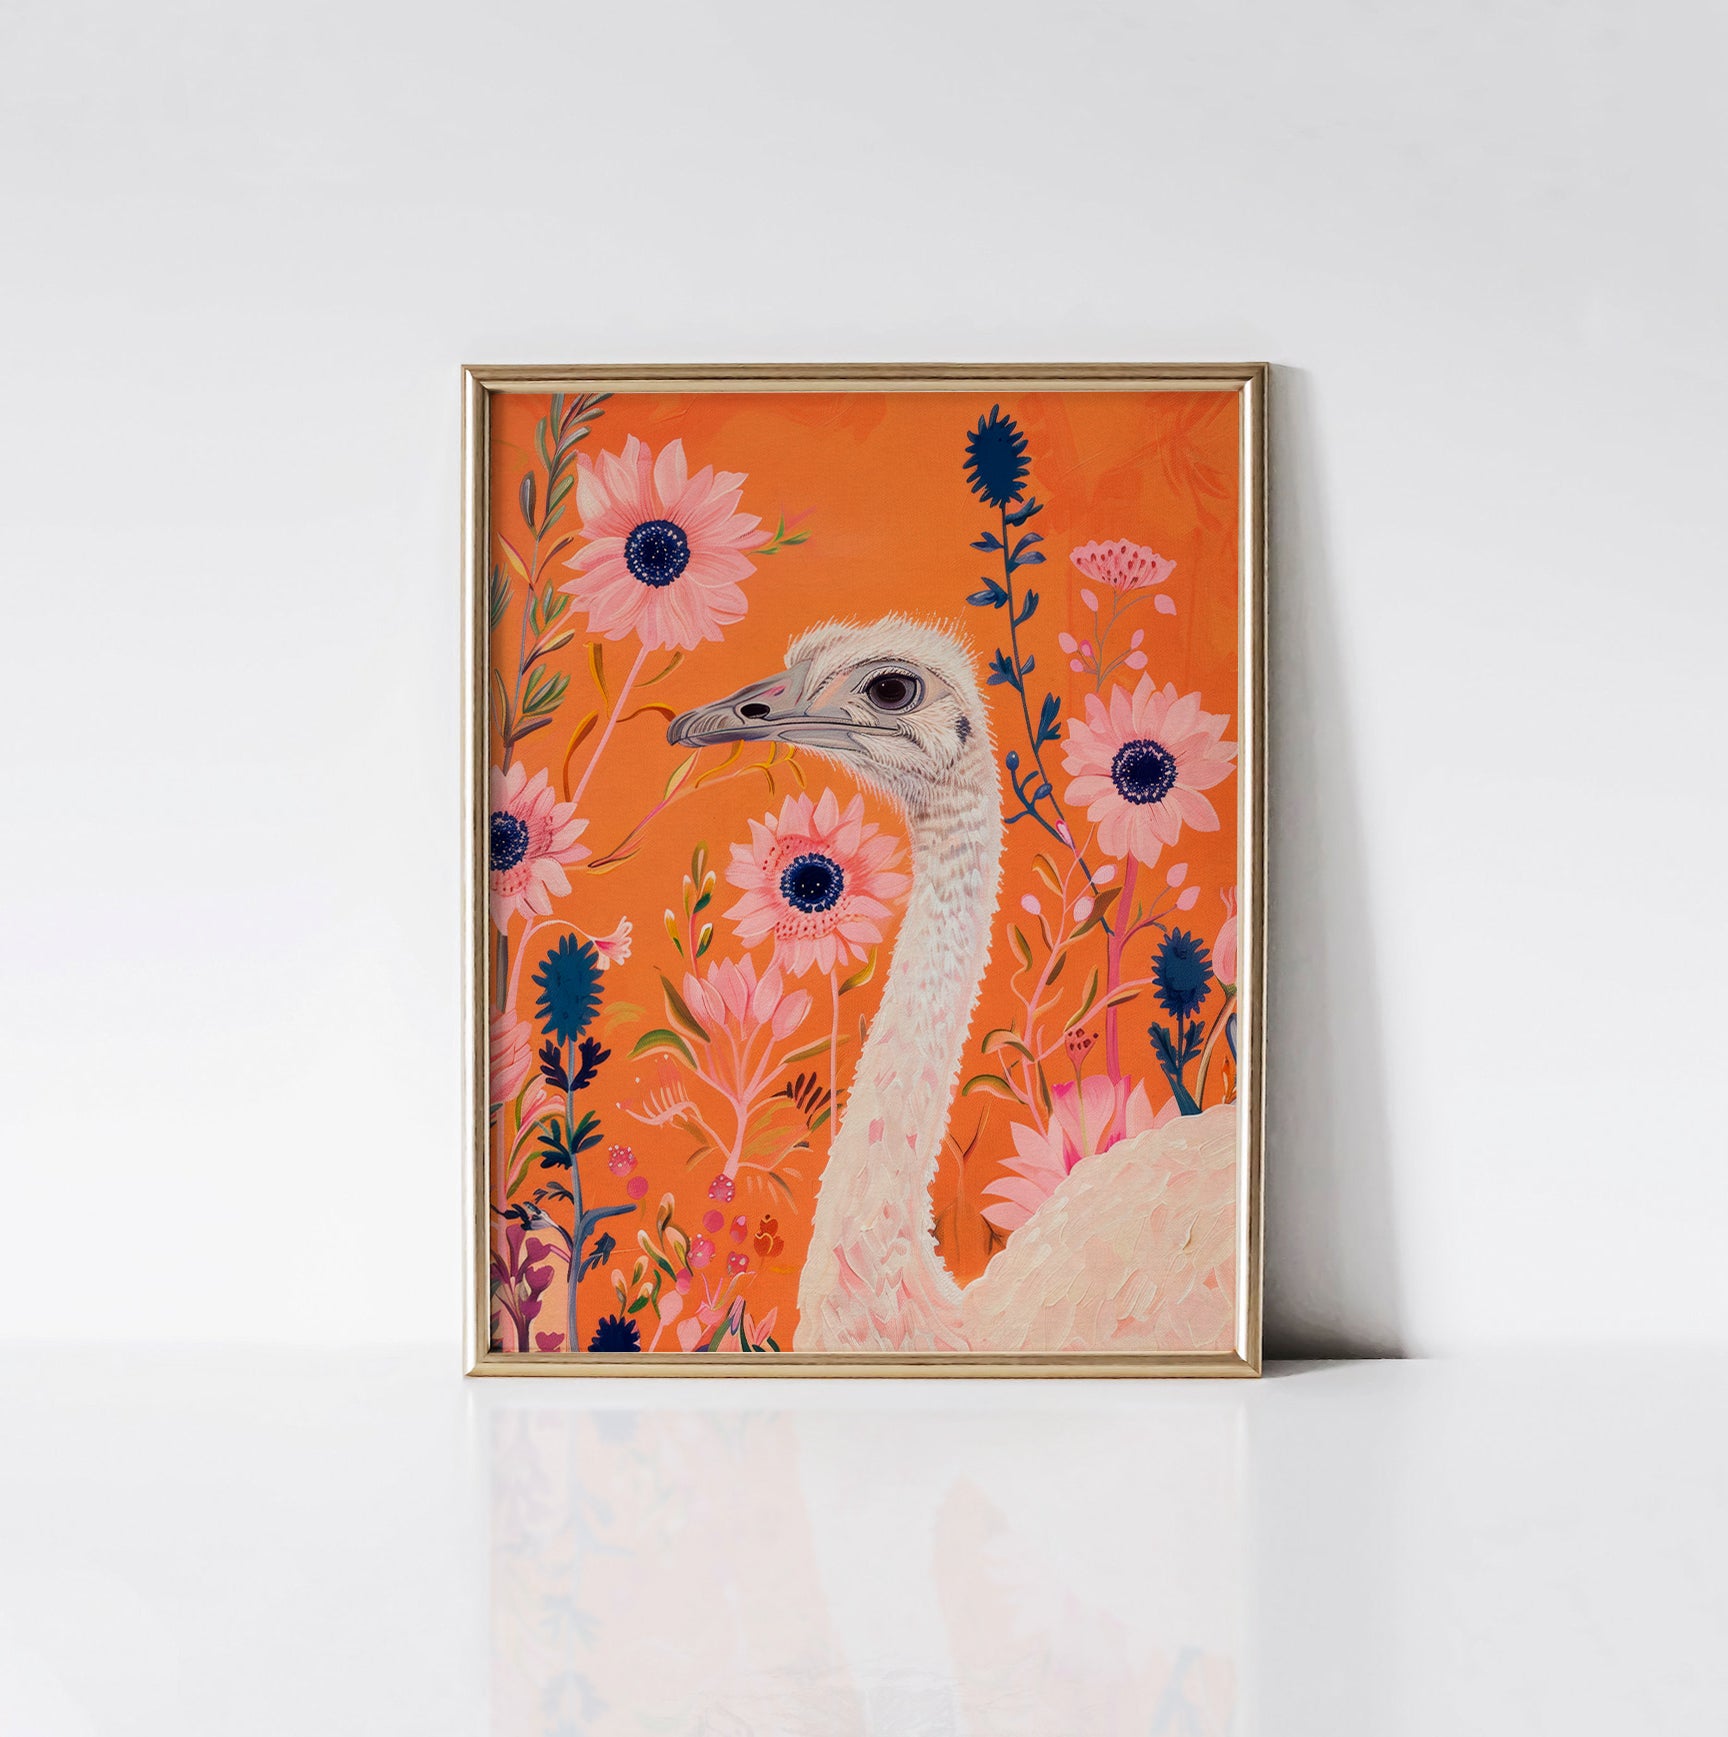 Ostrich in Bloom Art Print framed in an elegant gold frame, depicting a graceful ostrich surrounded by lively pink and blue flowers against a bold orange background.